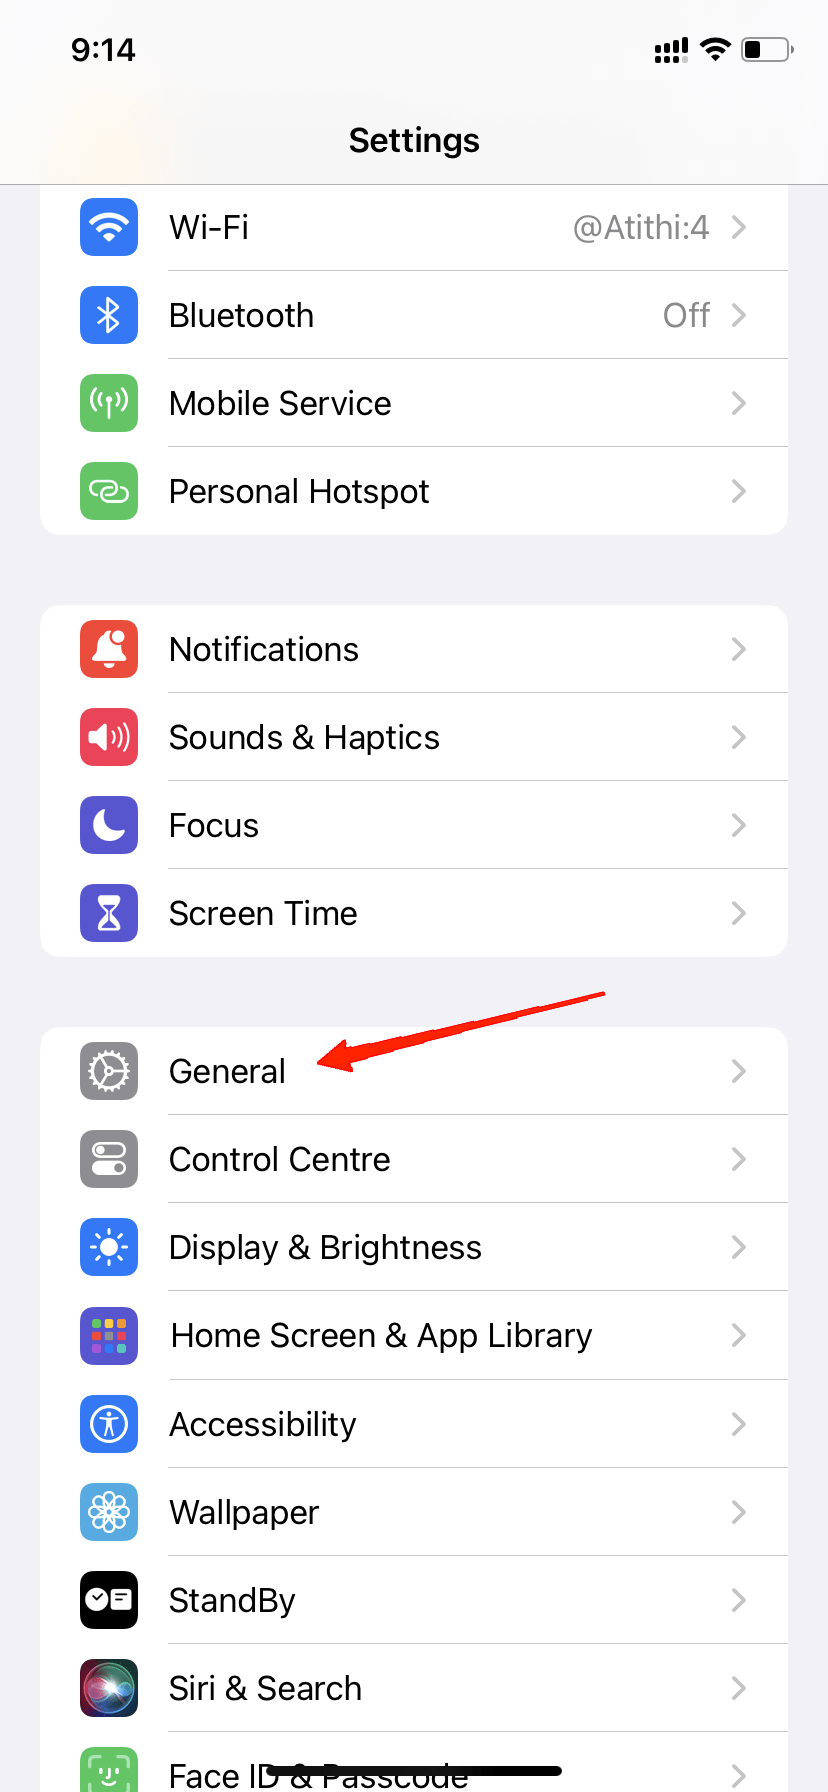 Open Settings and go to General.